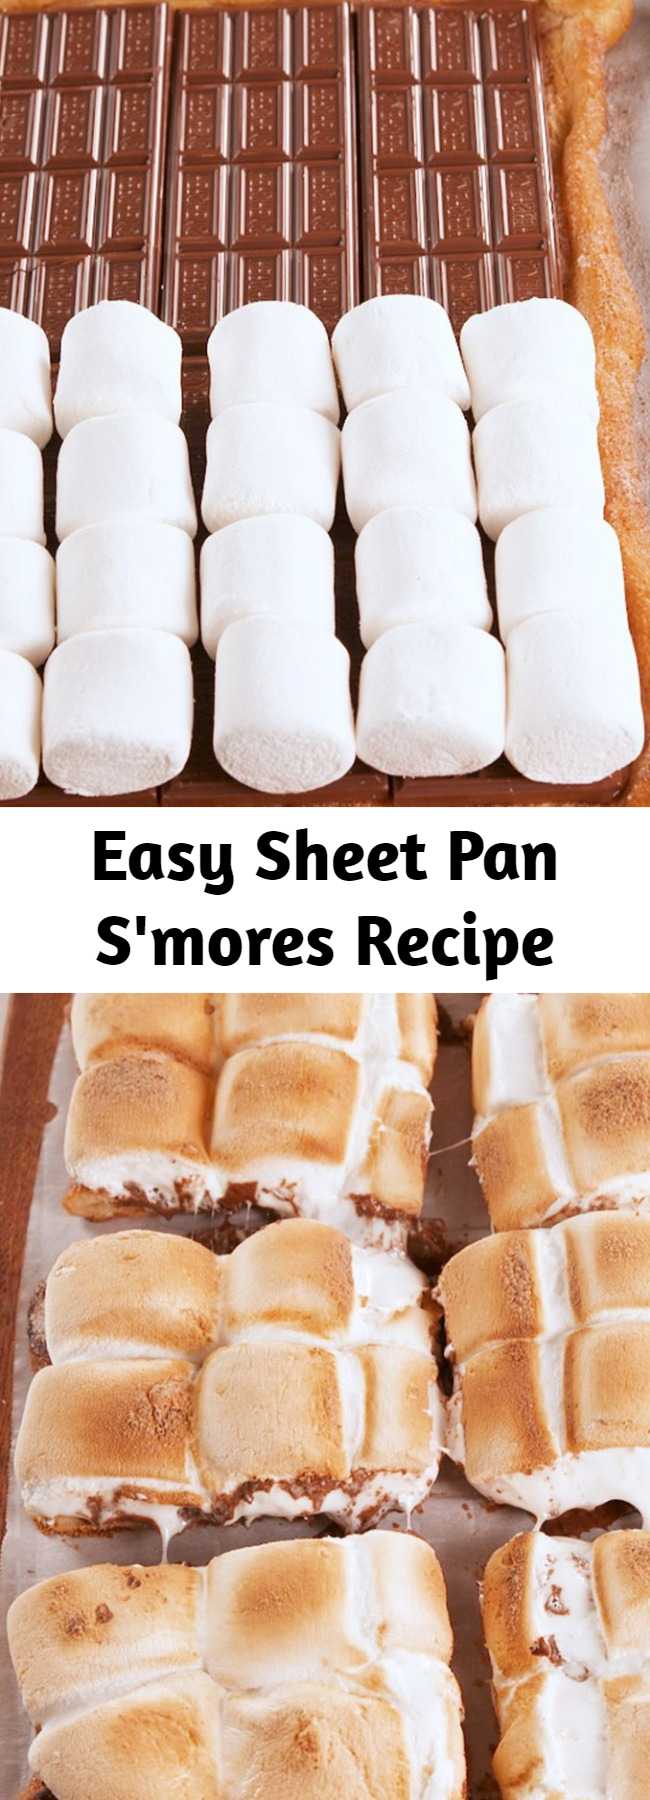 Easy Sheet Pan S'mores Recipe - The only problem we had with s'mores is that we couldn't eat them 365 days a year. Enter: Sheet Pan S'mores. S'mores all day, everyday. It's the best way to serve s'mores to a crowd, too. #easy #recipe #sheetpansmores #smores #summerrecipes #summerdessert #summerparty #memorialdaydessert #fourthofjuly